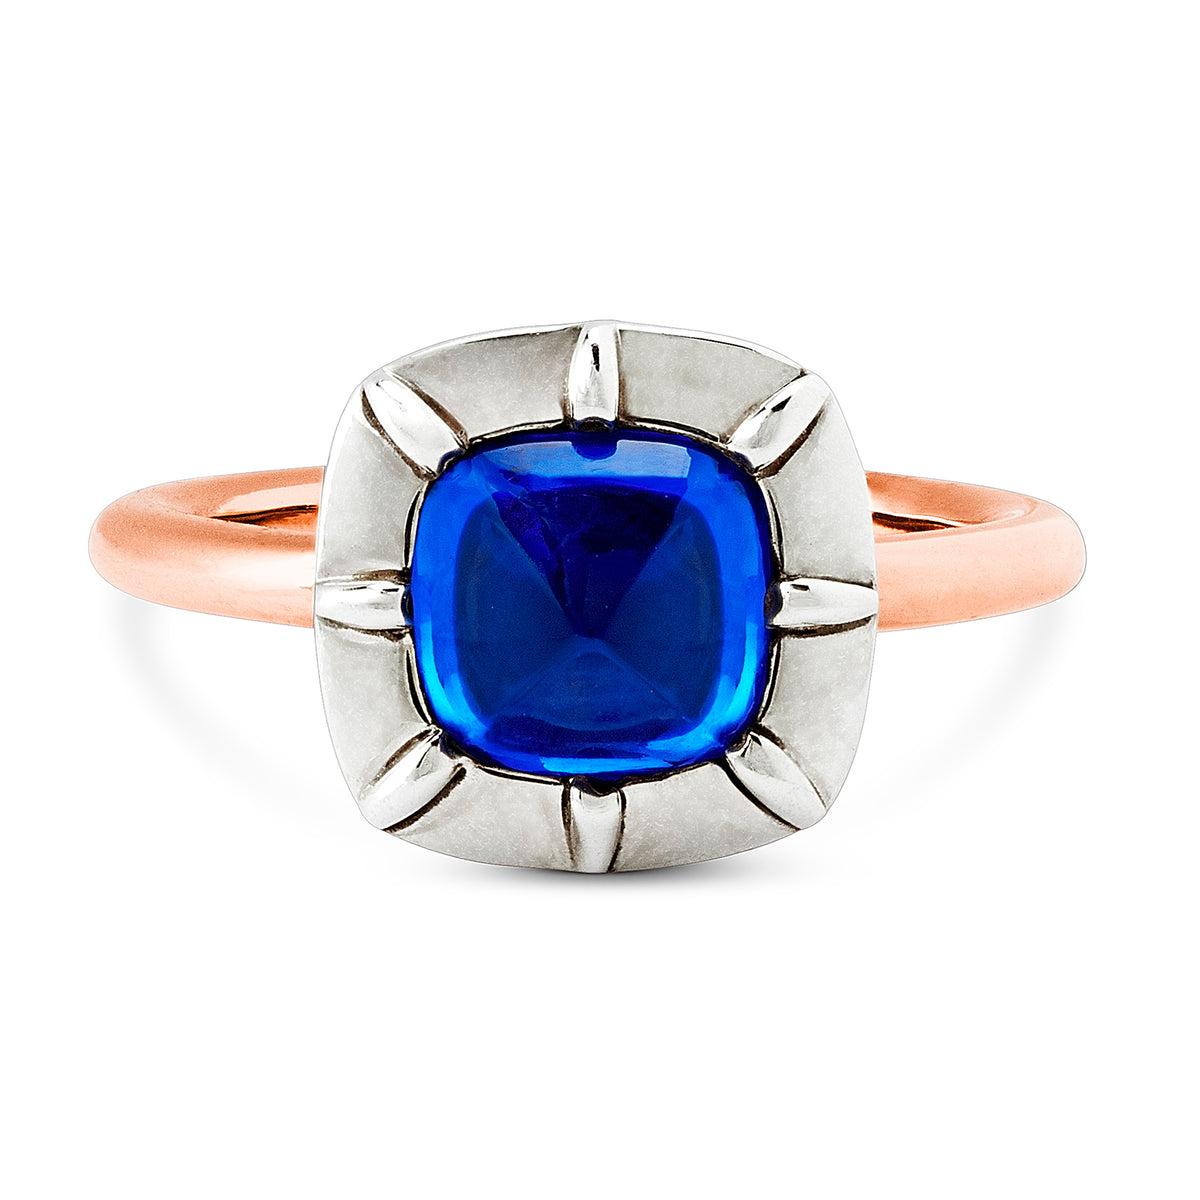 COLLET SAPPHIRE COCTAIL RING